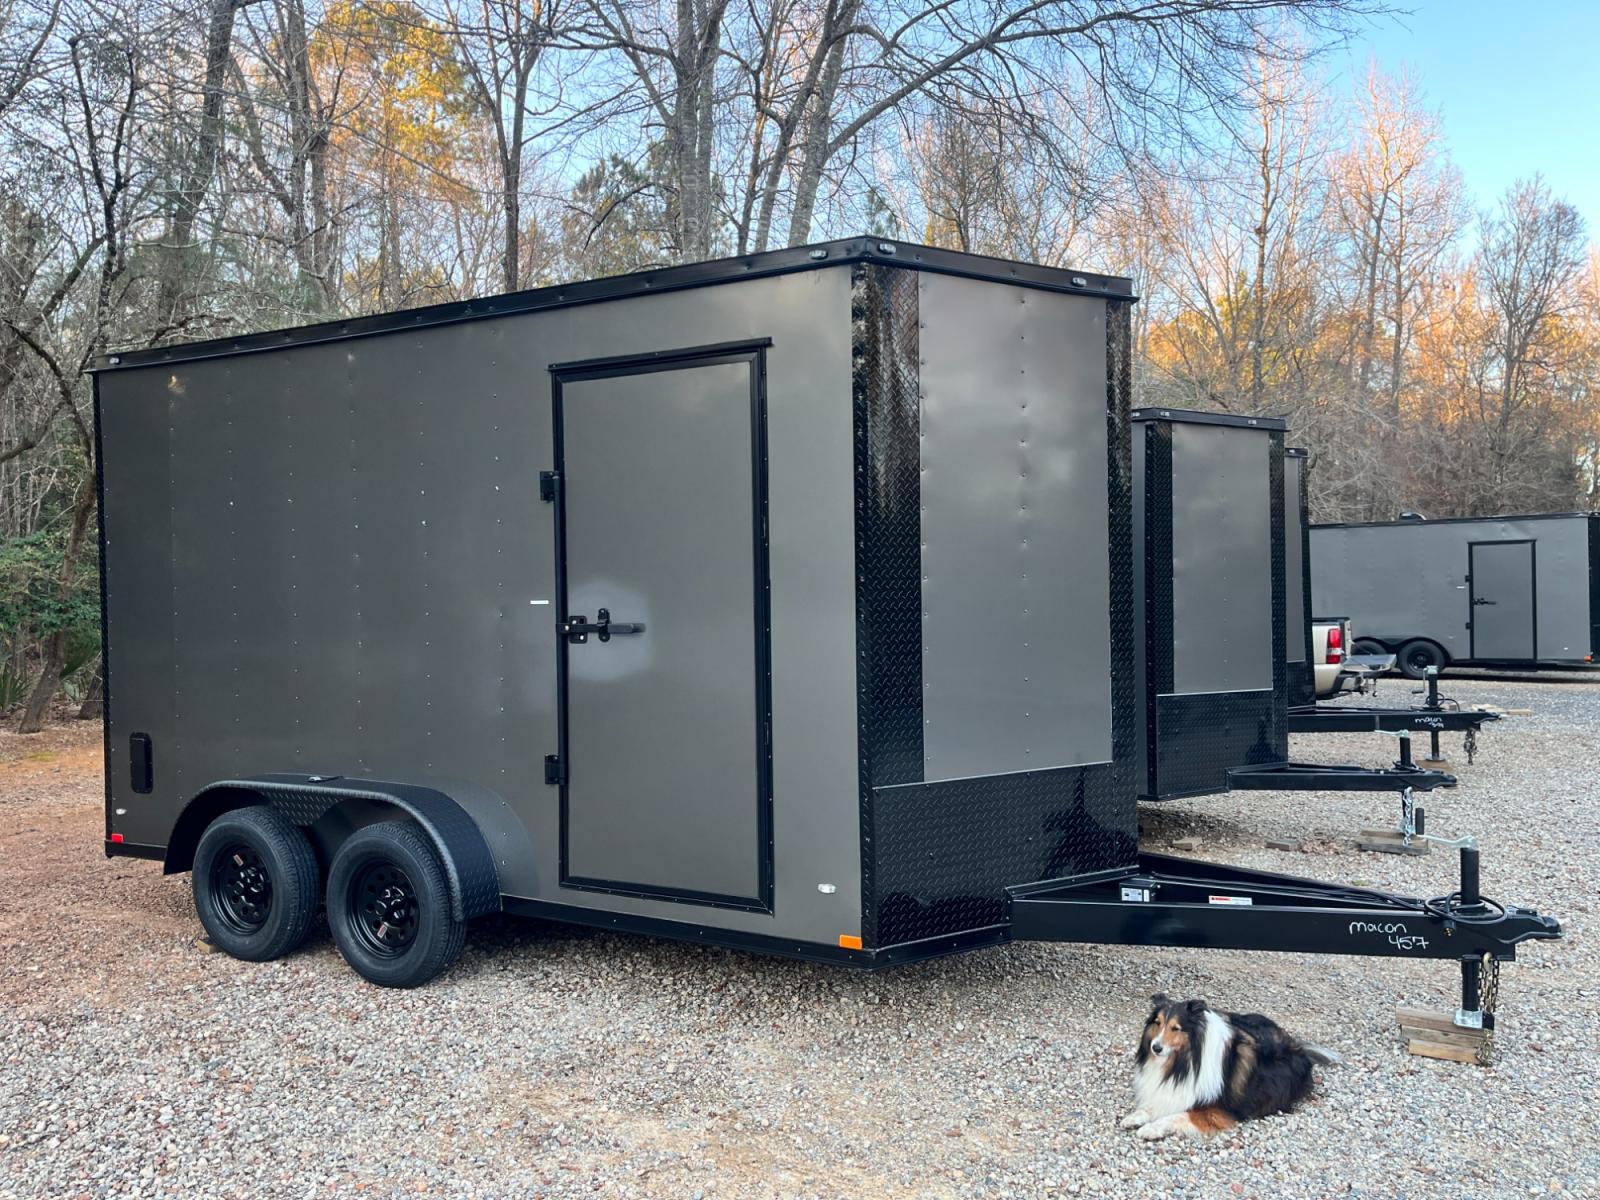 2023 .080 Charcoal Metallic w/Black Out Pkg. Elite Cargo 7ft X 14ft Tandem , located at 1330 Rainey Rd., Macon, 31220, (478) 960-1044, 32.845638, -83.778687 - Brand New 2023 "Top of the Line" Elite Cargo Brand Trailer Made in South Ga. Awesome 7ft X 14ft Tandem Enclosed Cycle Hauler & Cargo Trailer! Taller Inside Height is 7ft 6" Tall Inside & Ramp Door Clearance is 7ft! .080 Thick Metallic Charcoal Aluminum Skin is Awesome! Black Out Pkg Trim, Wider - Photo #19